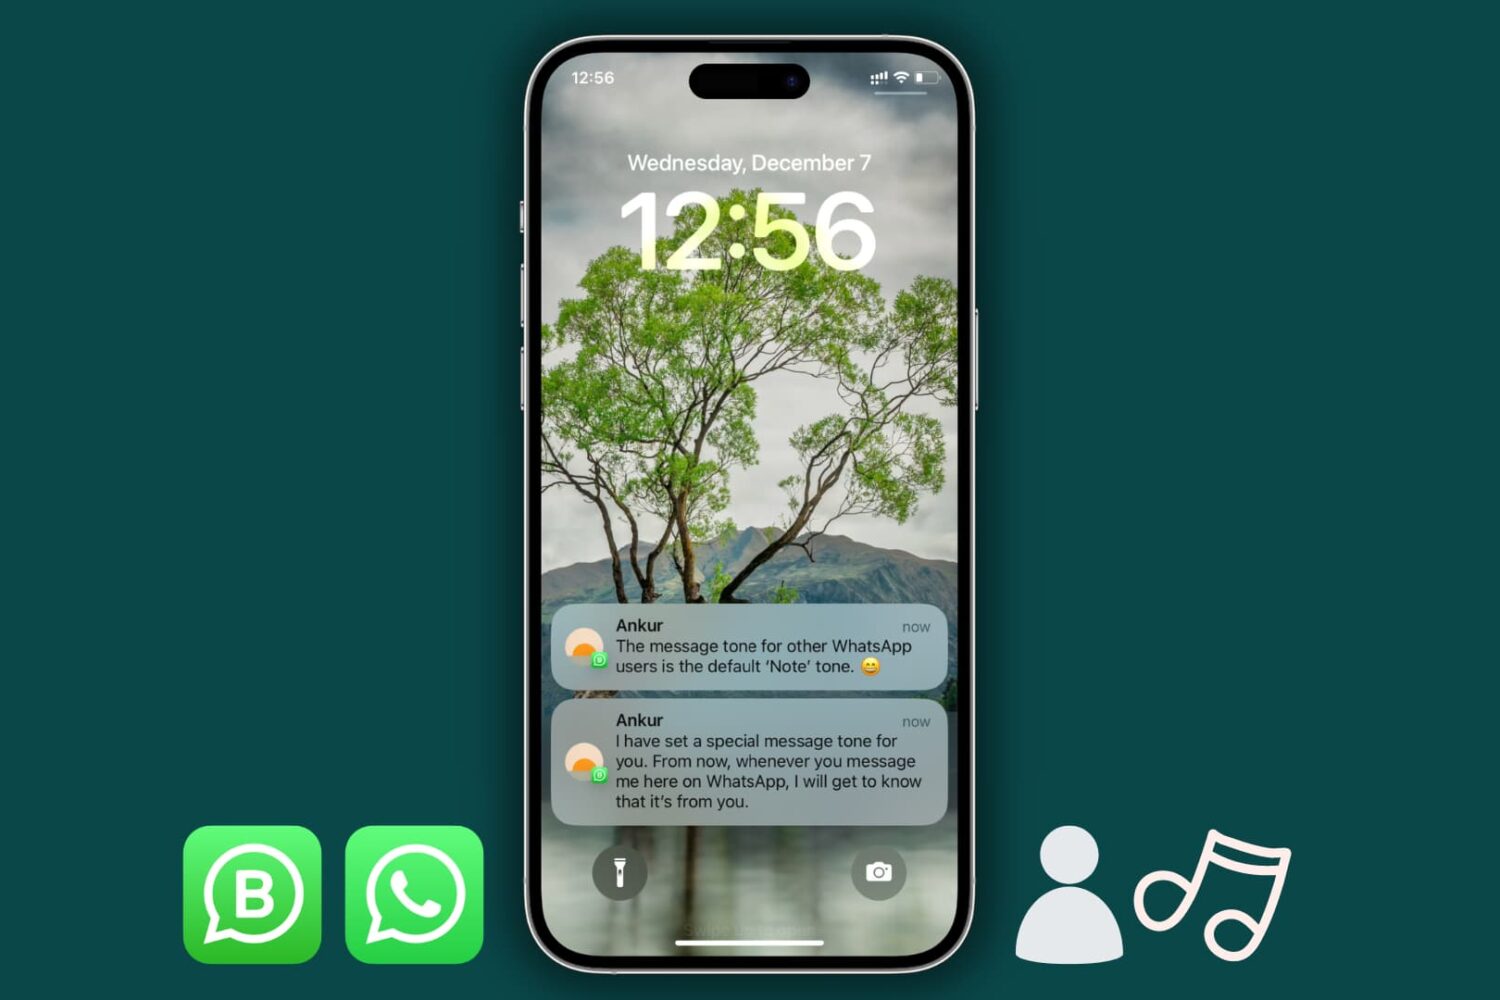 Personalize Your Messages with Stickers in WhatsApp « Smartphones :: Gadget  Hacks